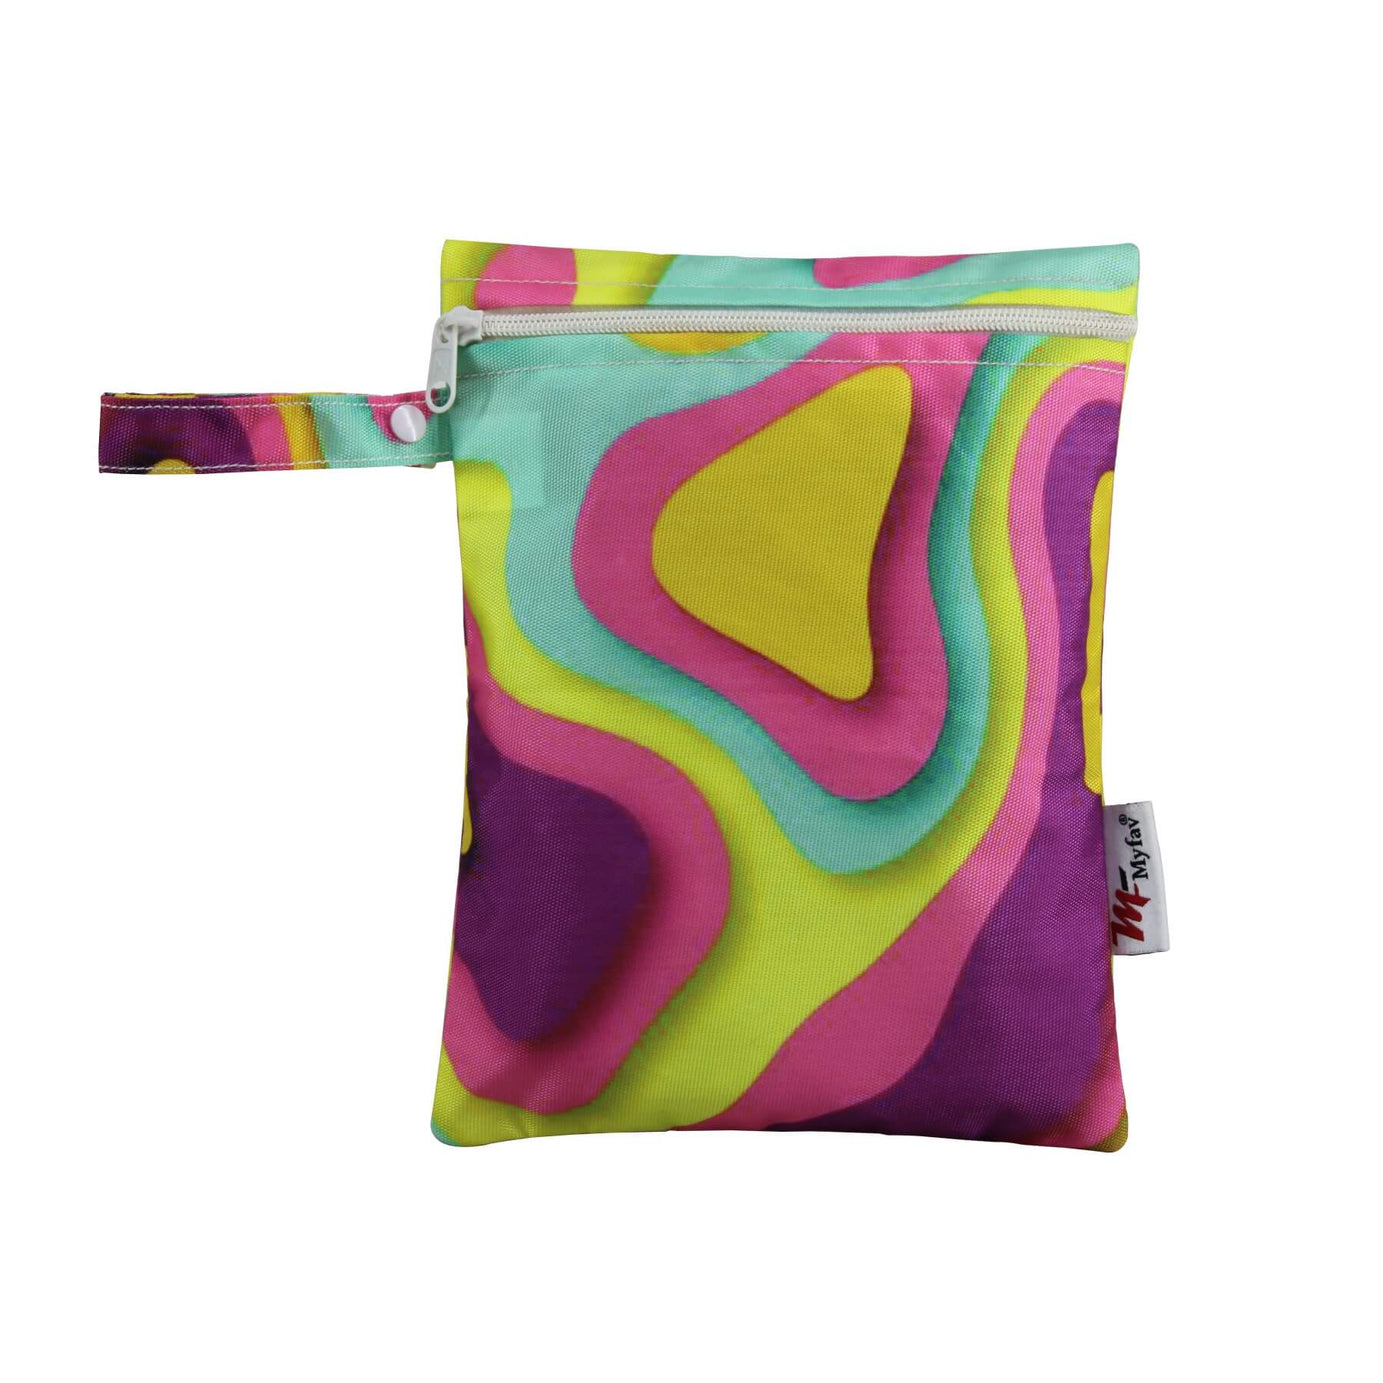 My Fav Spiral Print Multiutility Wet Dry Pouch/Diaper Bag/Travel Pouch/Travel Kit